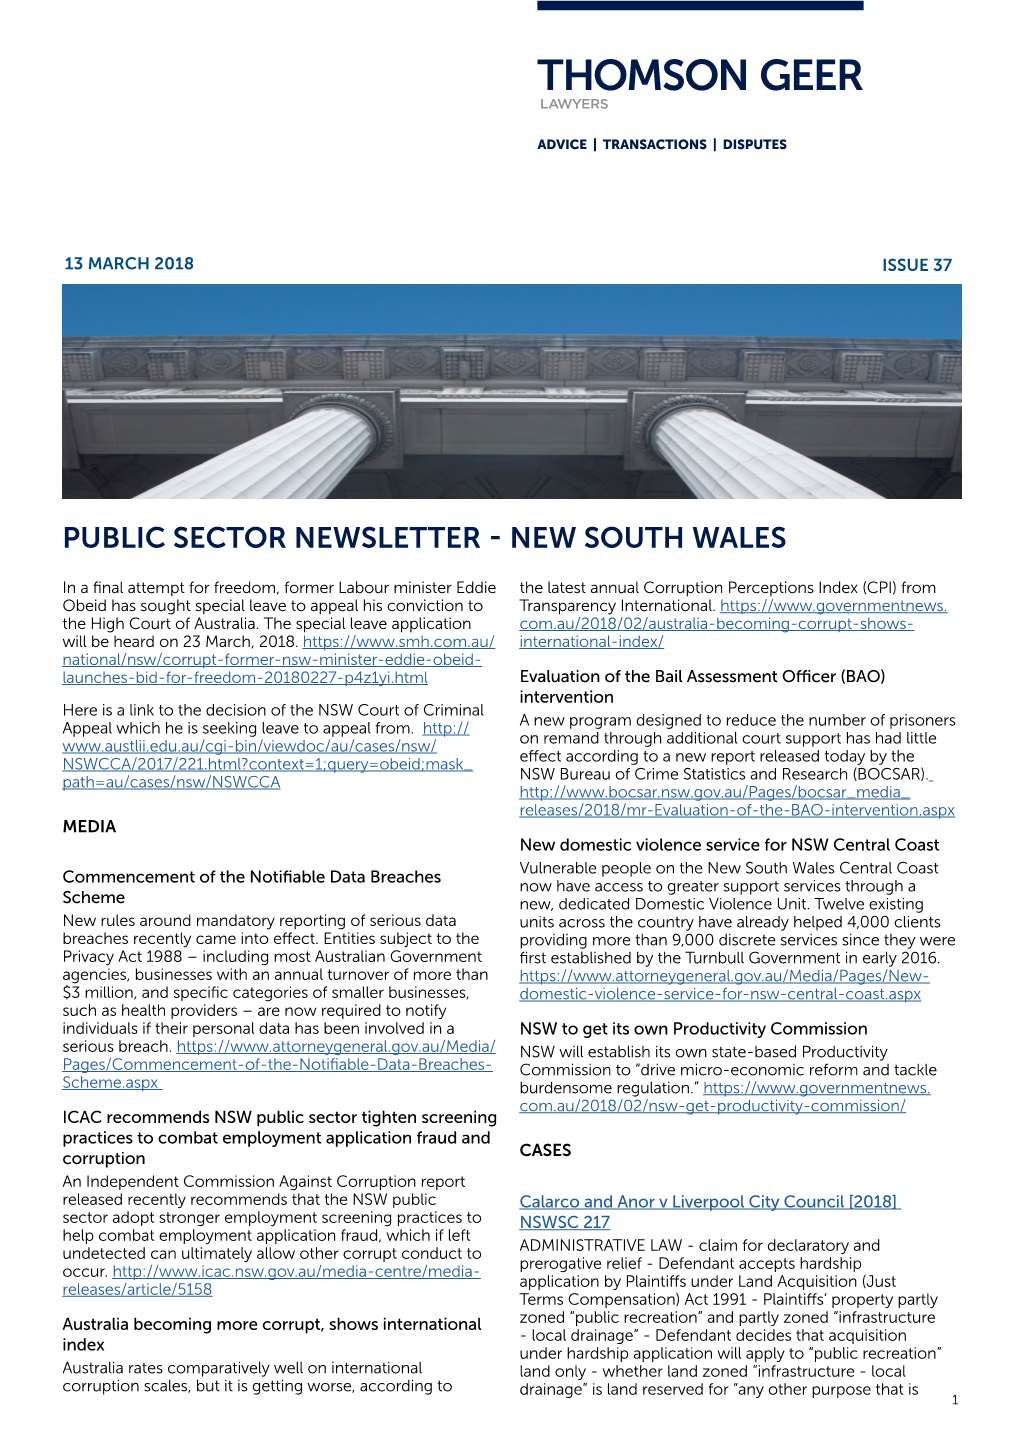 Public Sector Newsletter - New South Wales